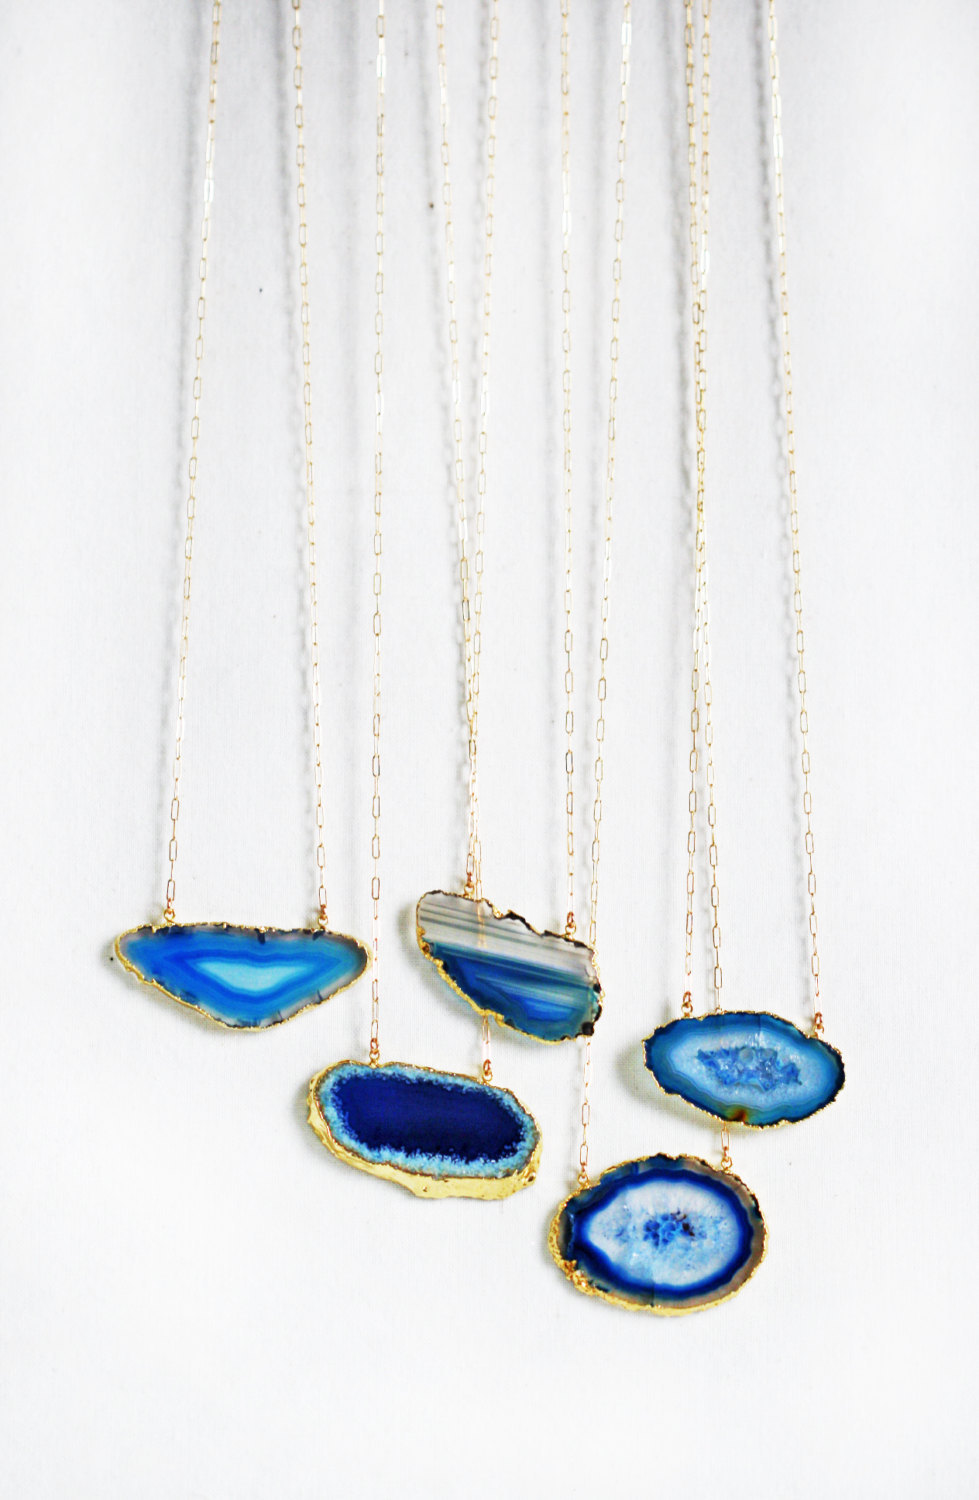 etsyfindoftheday:

etsy find of the day 1 | 12.22.13
blue ‘zoni’ necklace by keijewelry
a blue christmas is far from sad if you celebrate it with one of these stunning blue agate geode necklaces. perfect for gifting!
